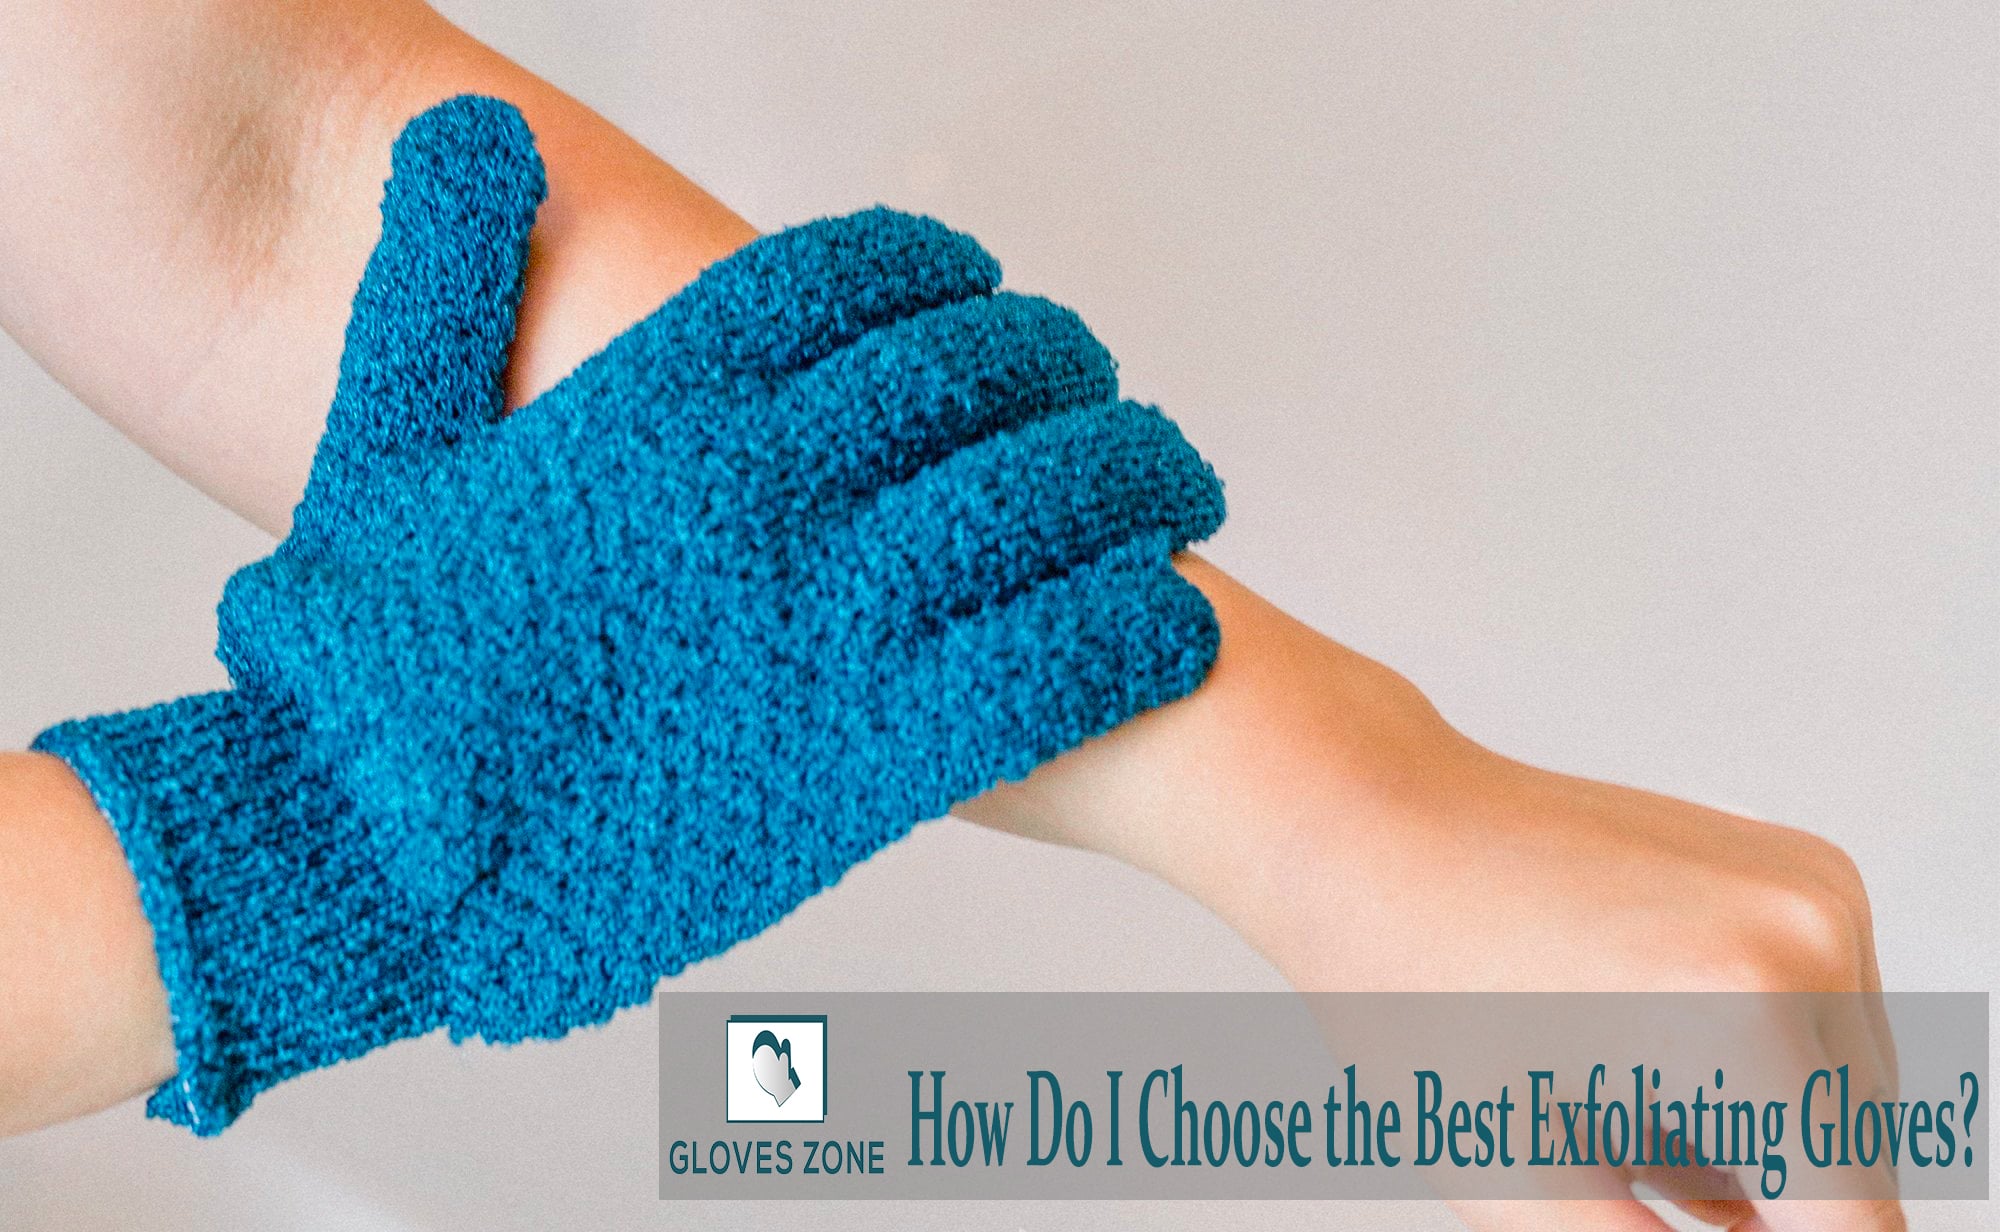 How Do I Choose the Best Exfoliating Gloves?